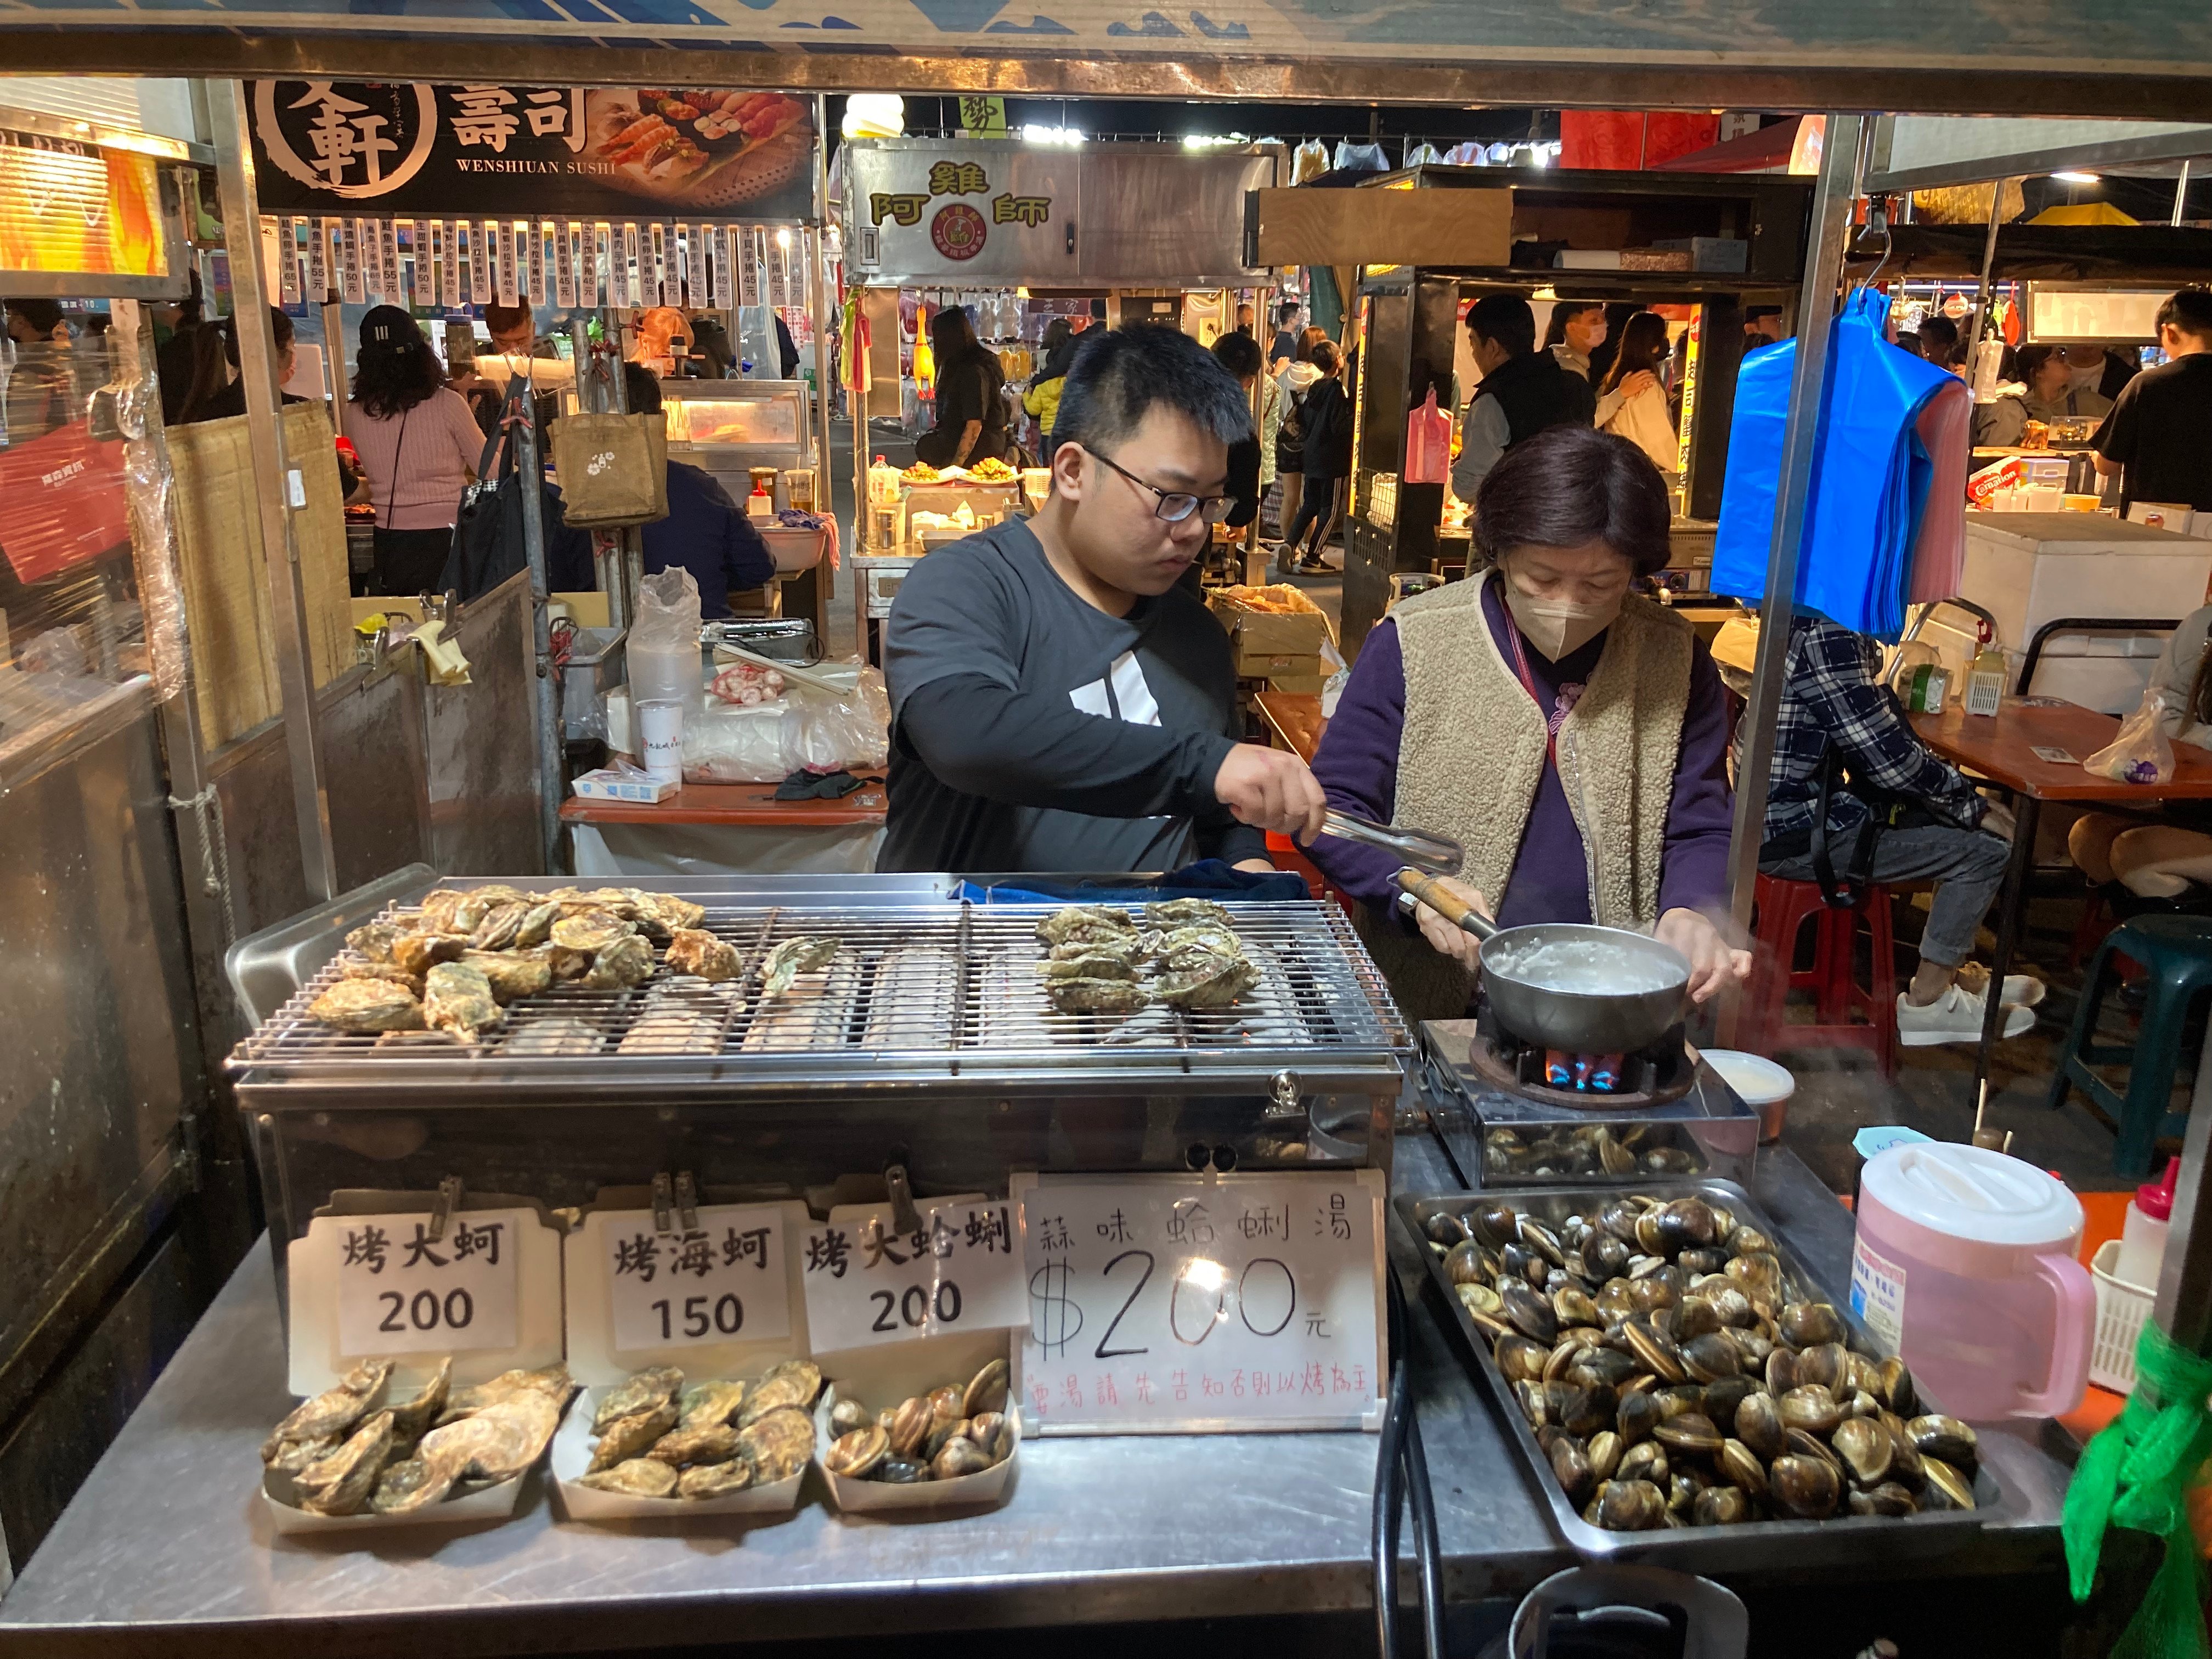 A grilled oyster stall at Tainan’s Flower Night Market. The night markets of Taiwan’s oldest city offer the largest selections of food, while other local delicacies can be found at places like hotpot restaurants. Photo: Cameron Dueck